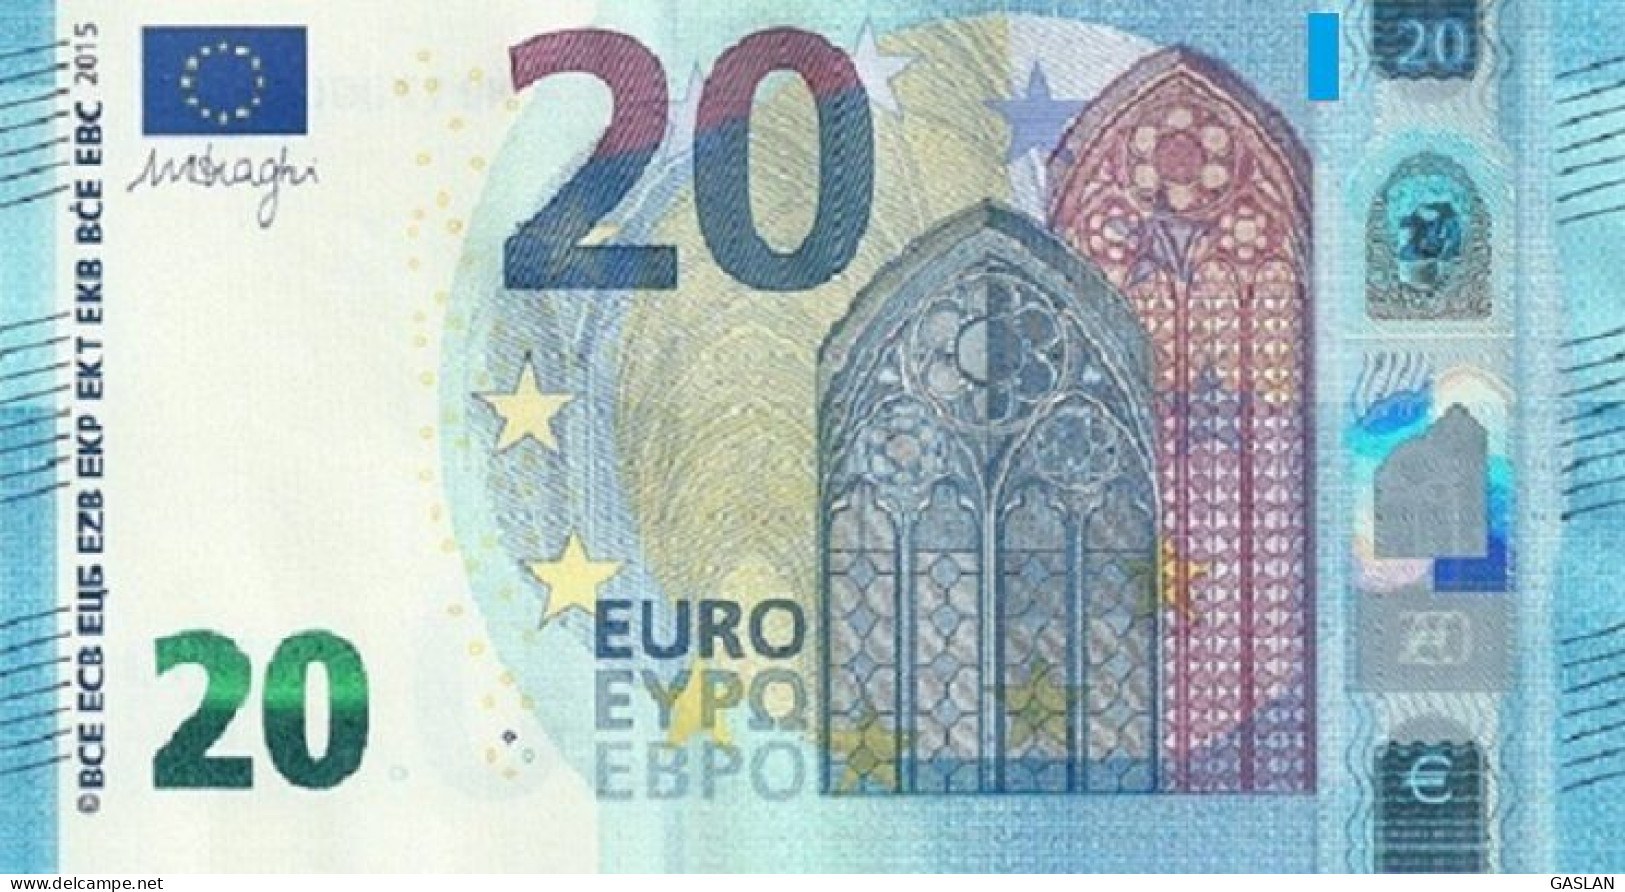 IRELAND 20 TC T002 T003 T004 UNC DRAGHI ONLY ONE CODE - 20 Euro